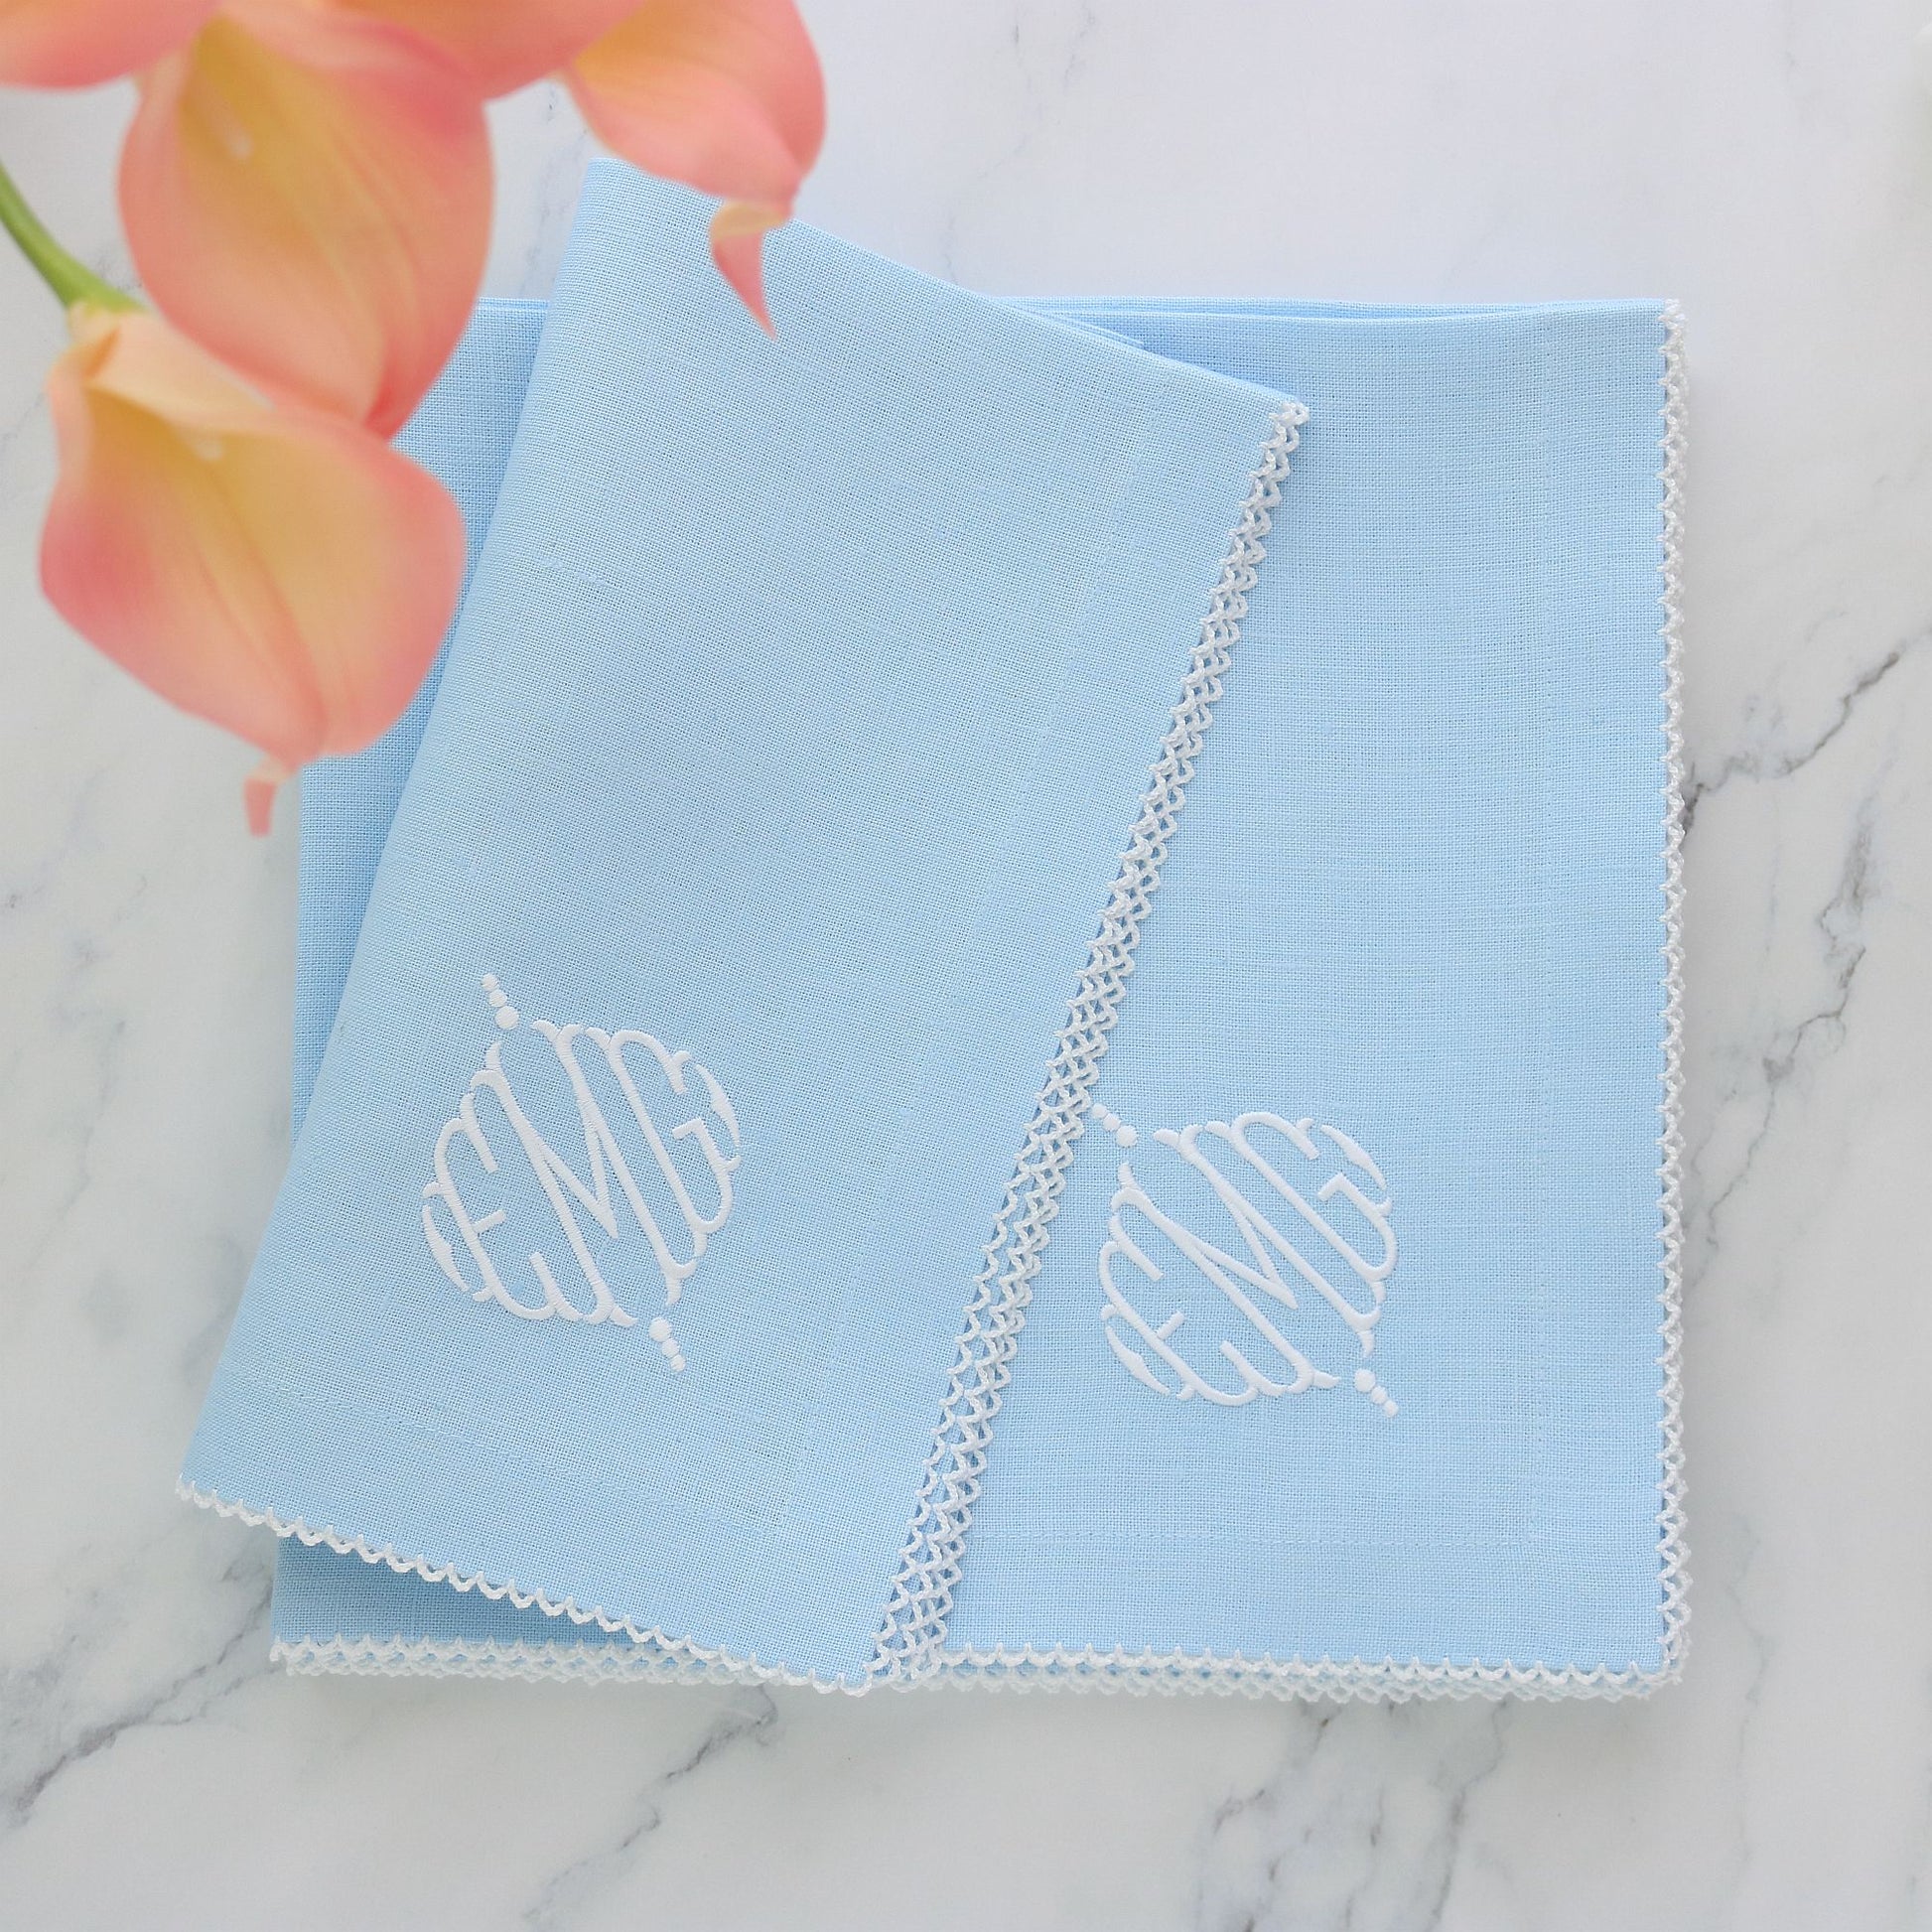 Baby blue linen dinner napkins with picot tirm and monogram